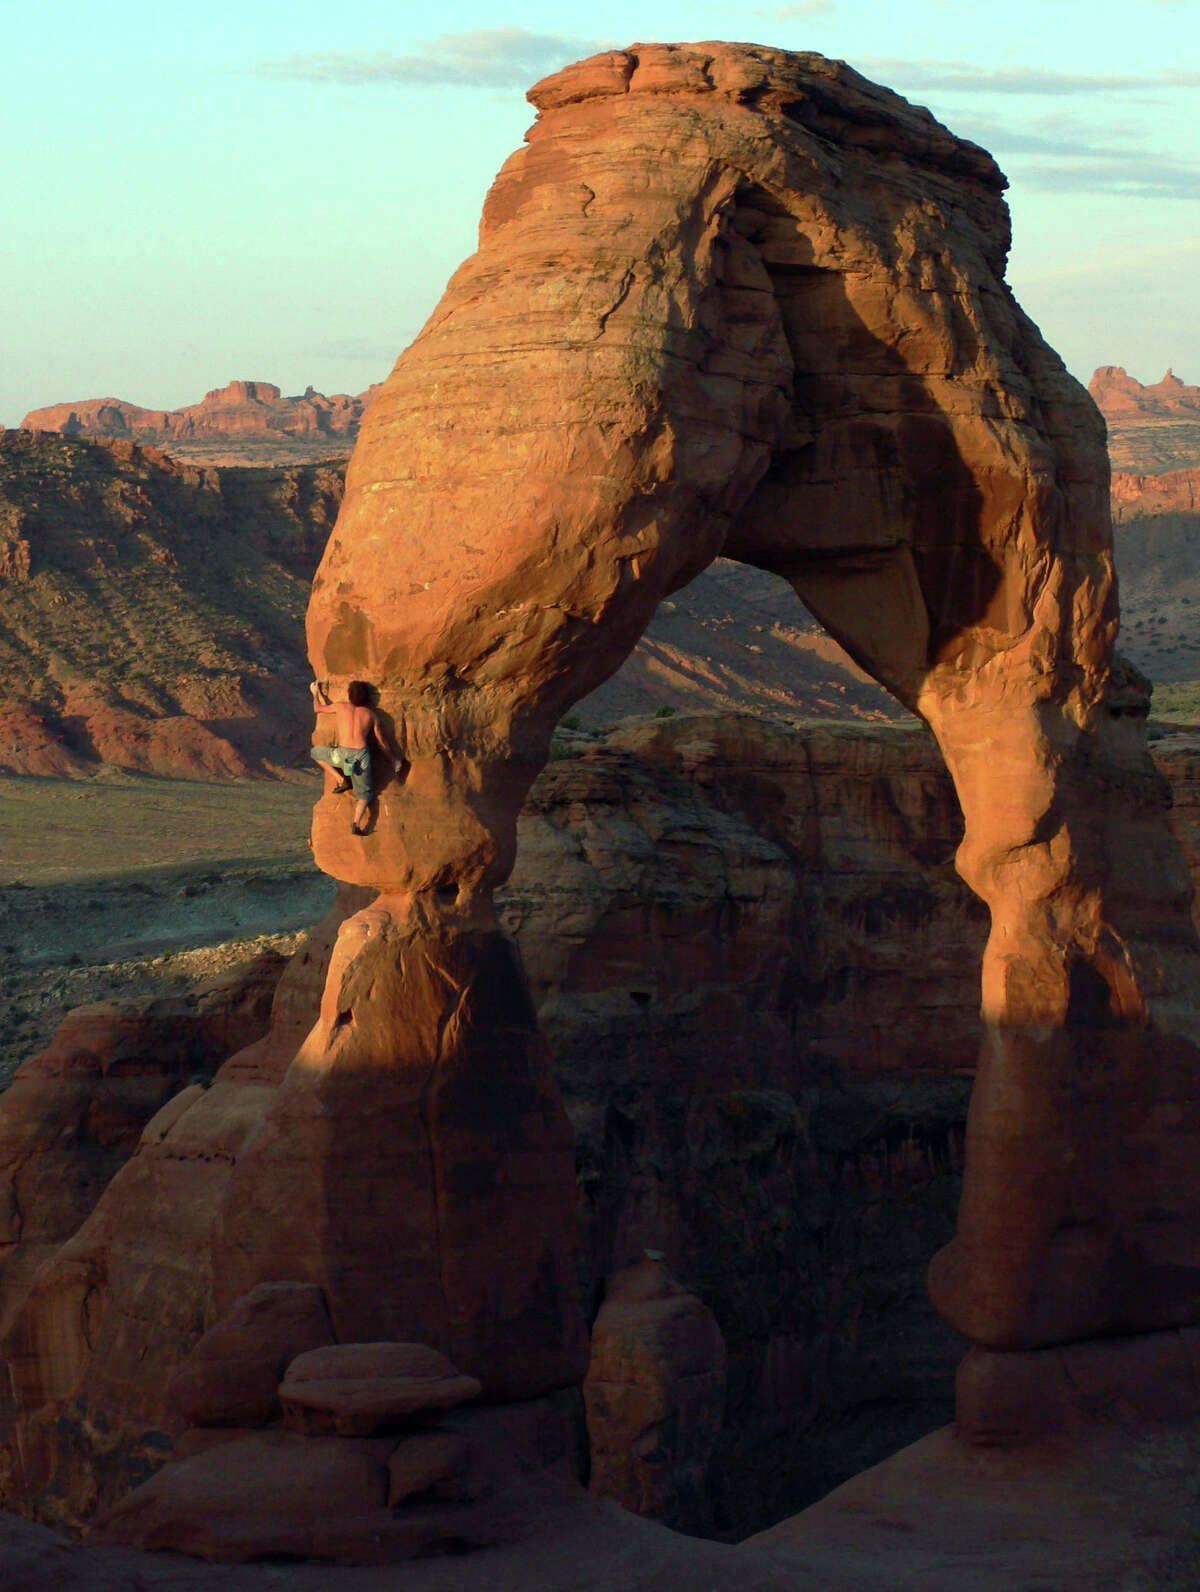 Famed rock climber Dean Potter makes his way up Delicate Arch in Arches National Park in Utah in 2006.